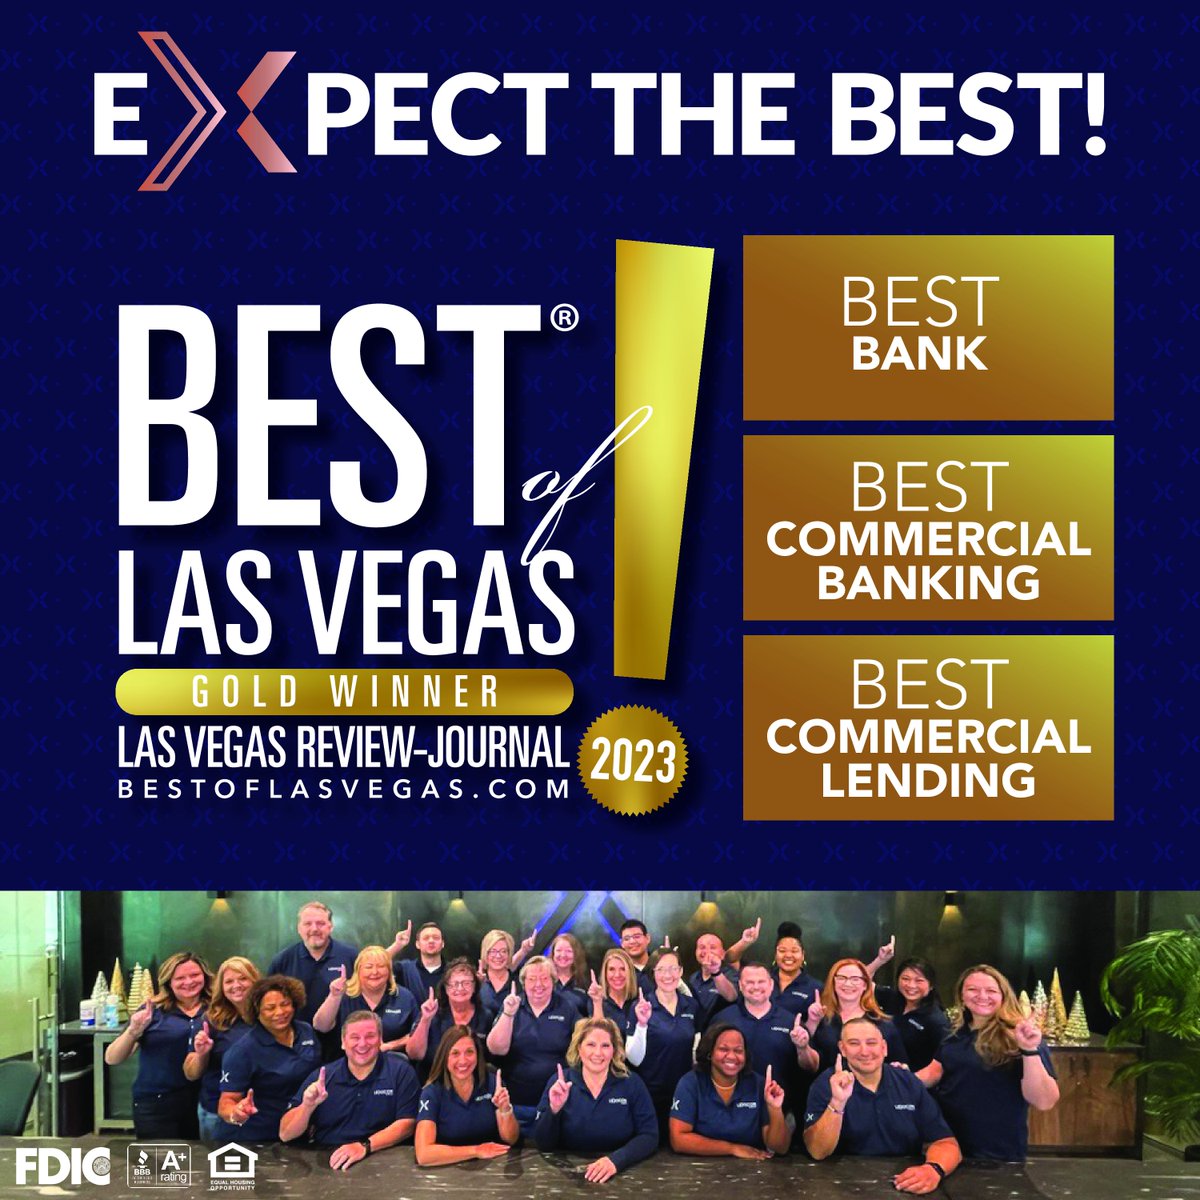 Exciting news! 🎉 

We're thrilled to share that we have won GOLD in Best Bank, Commercial Banking, and Commercial Lending in @TheBestOfLV awards!

We thank our clients, partners, and community who voted and contributed to this incredible achievement. #BestOfLasVegas #BOLV2023